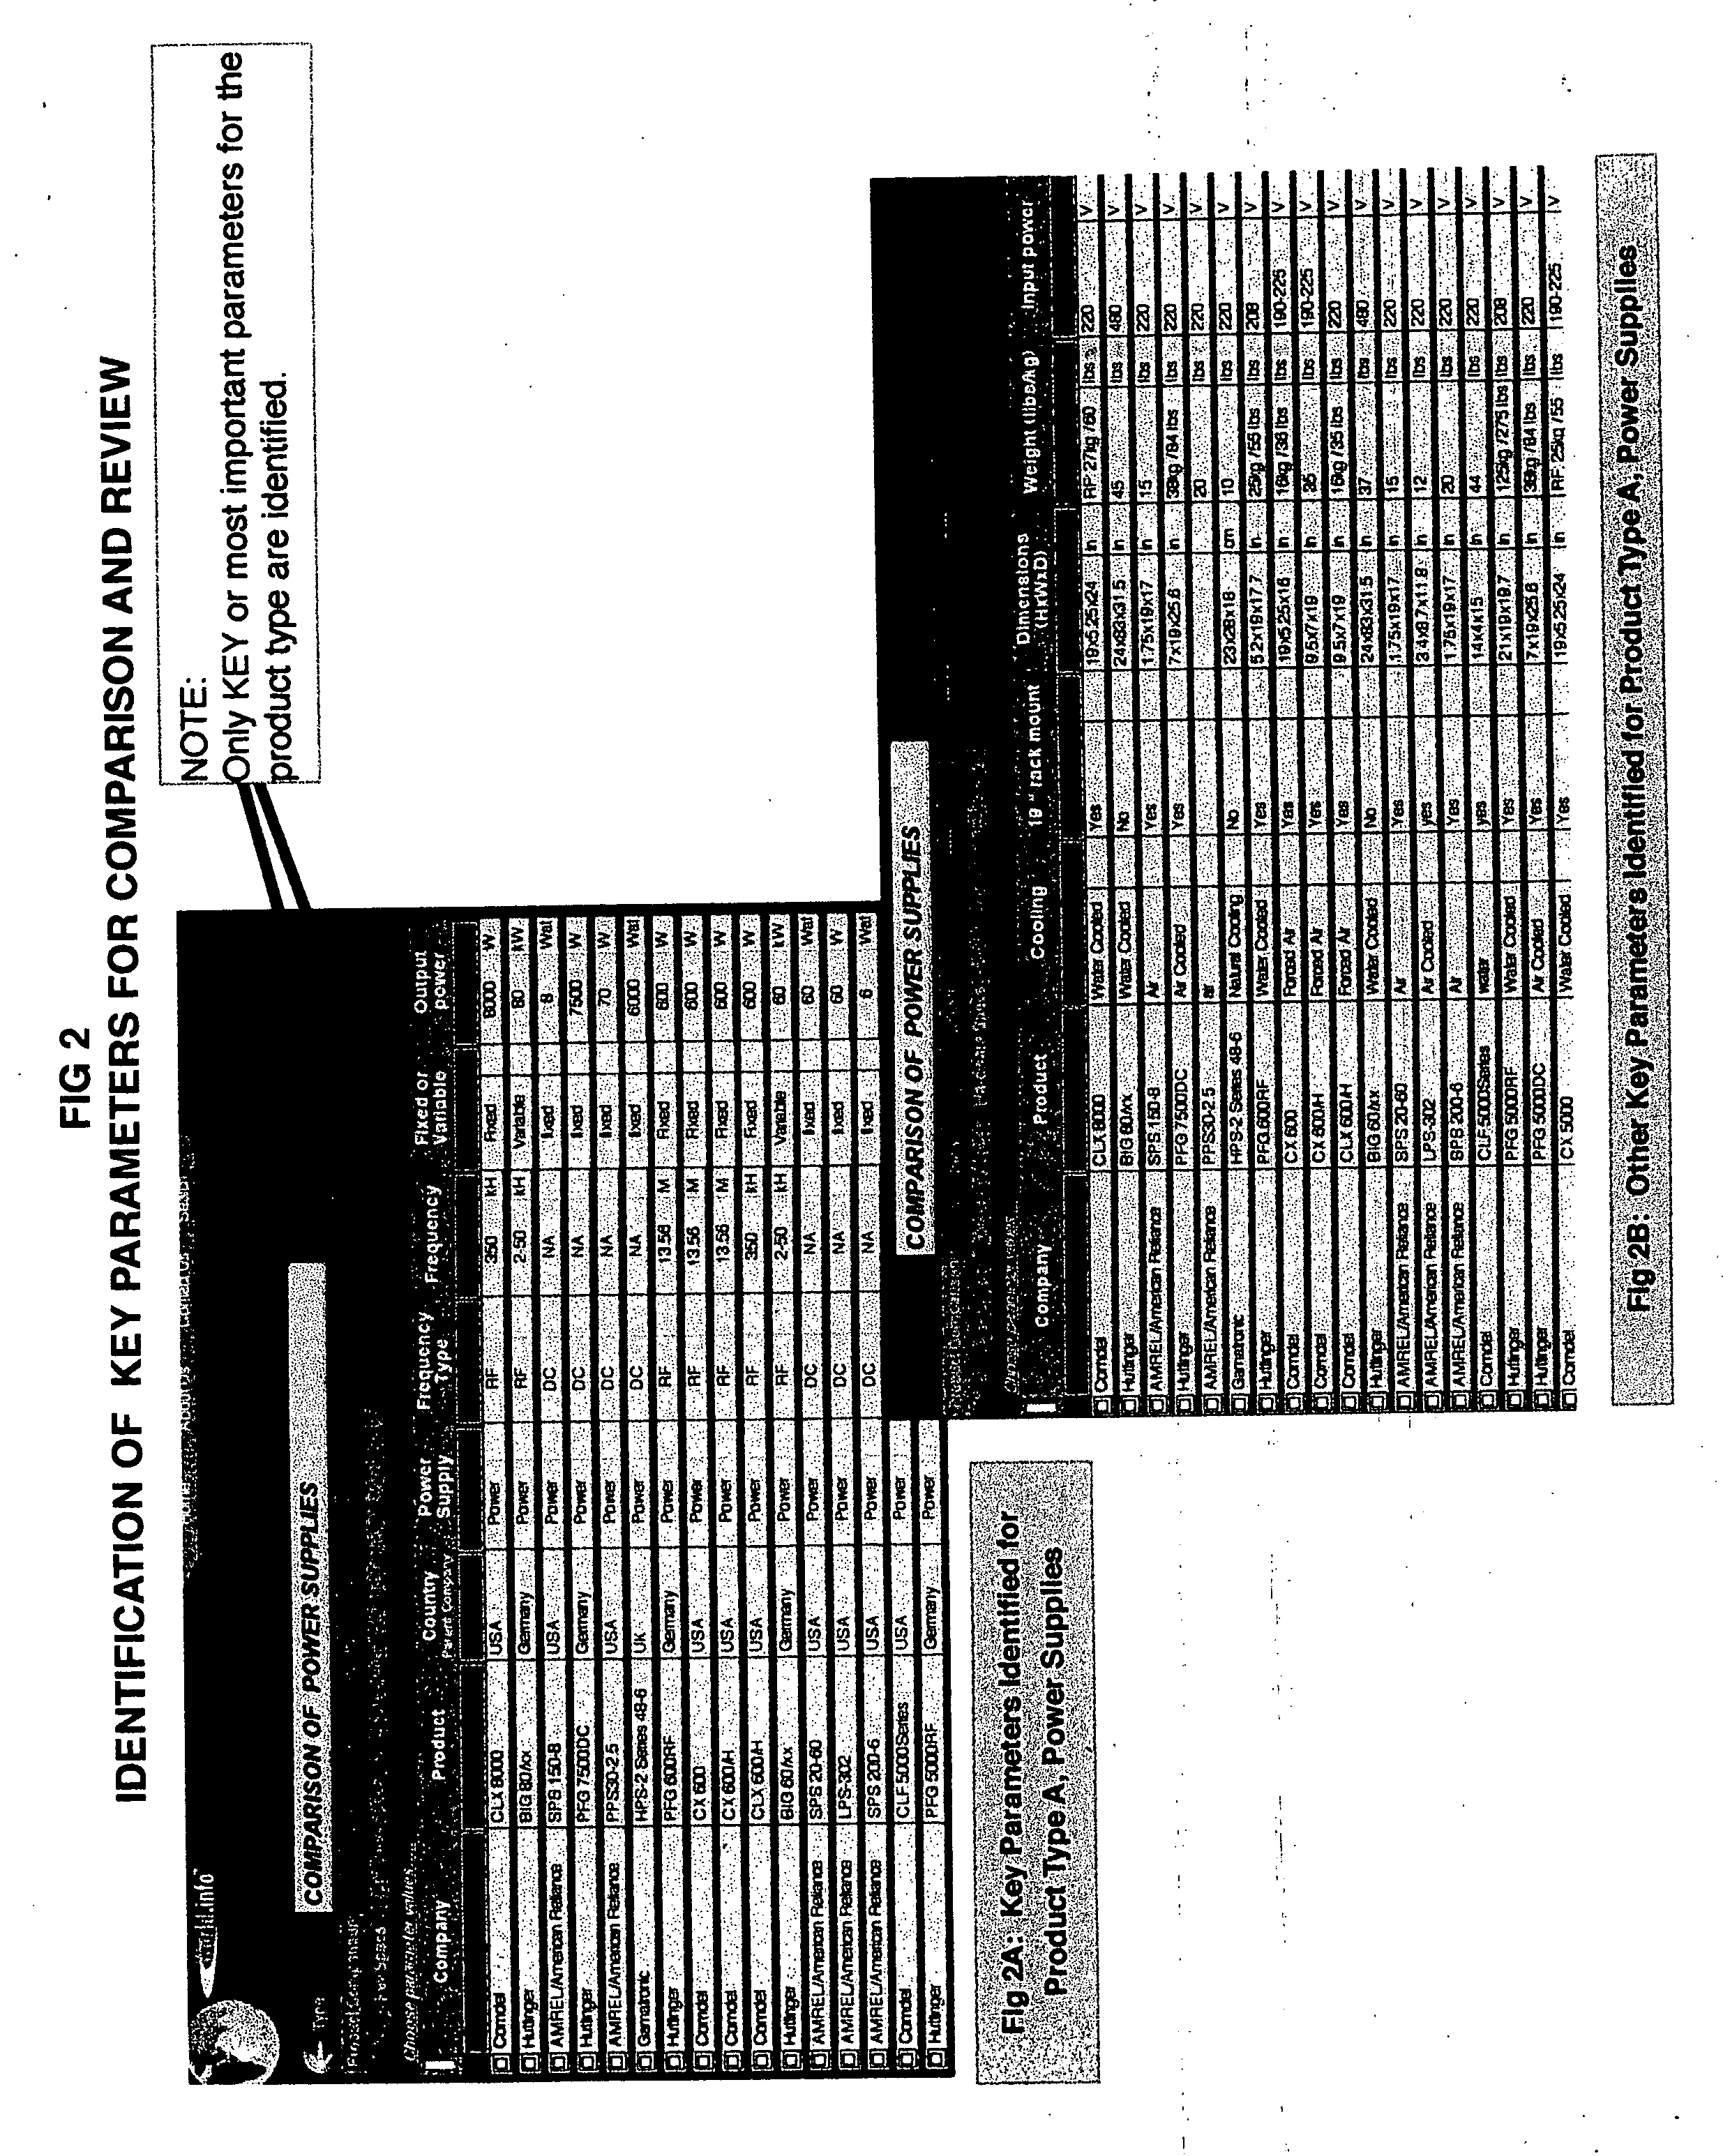 System and method for organization and display of data using identification of key data for comparison and analysis